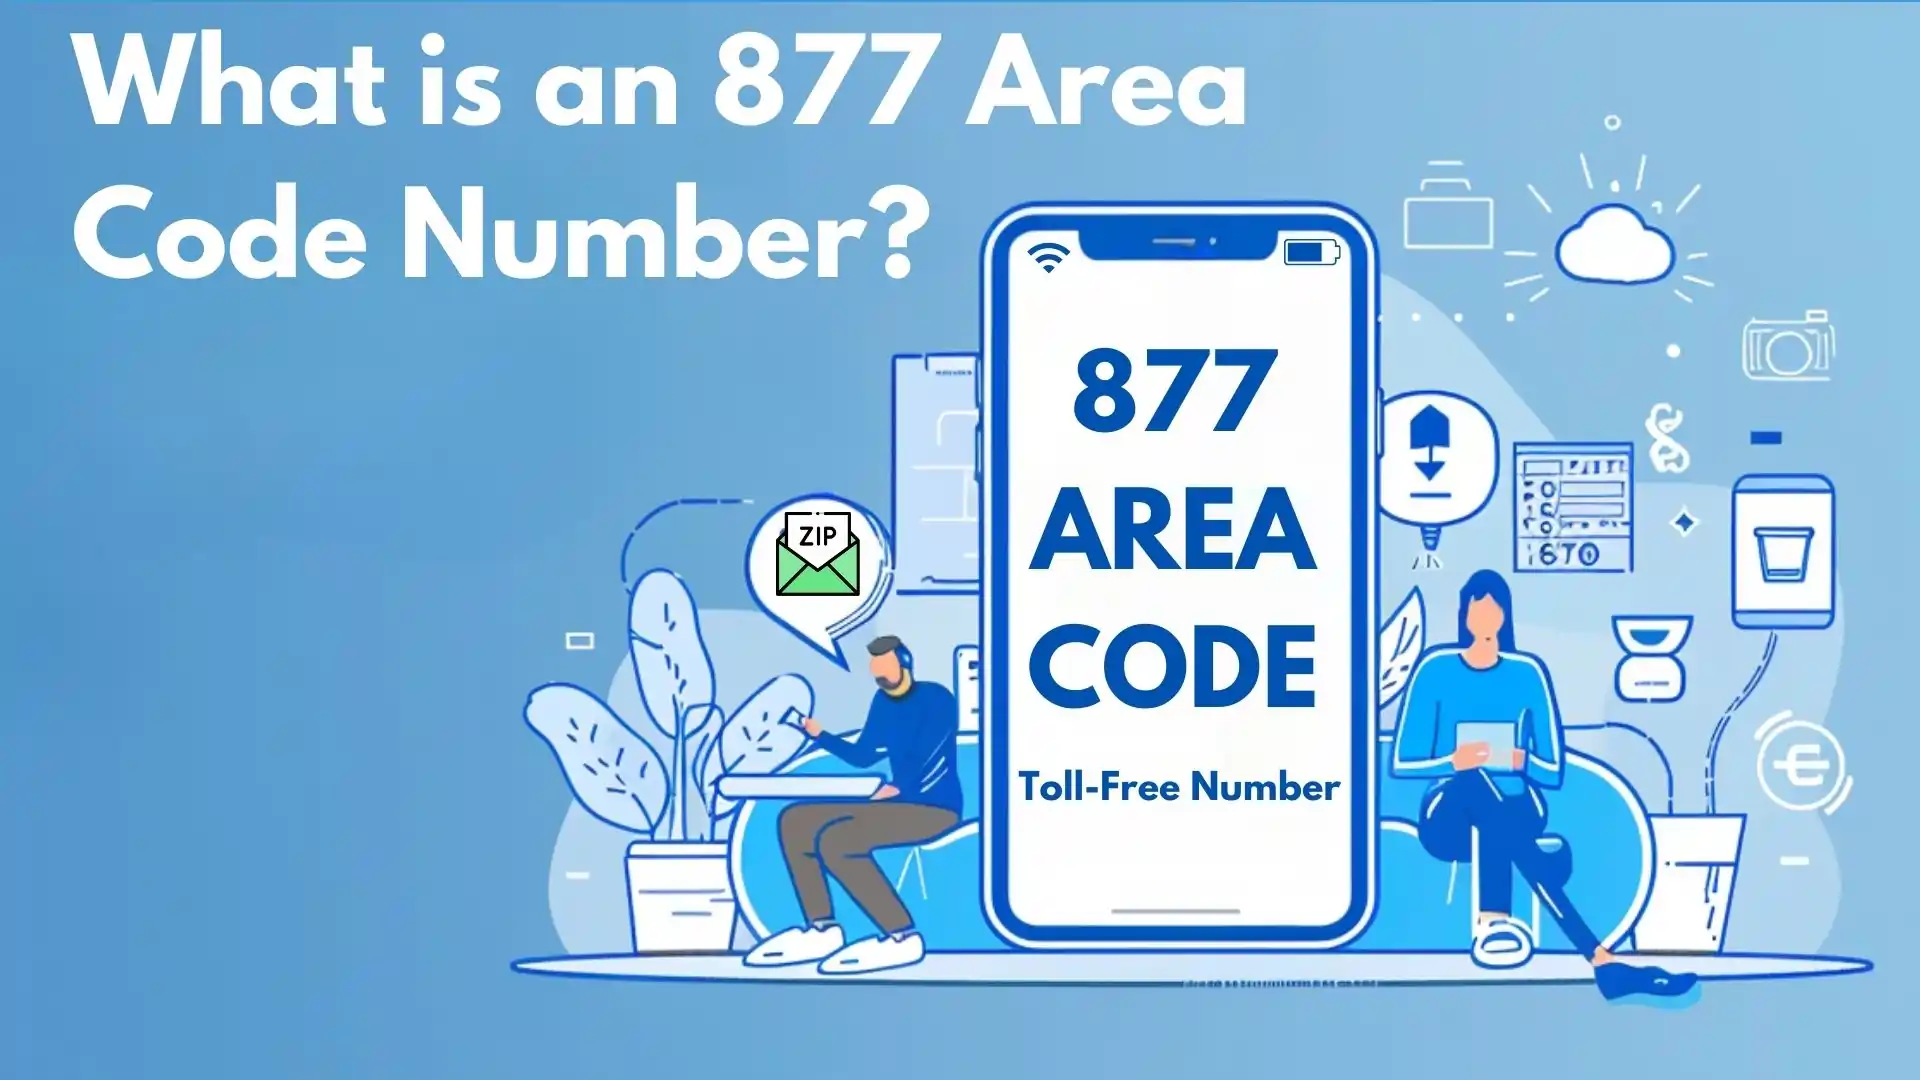 What is an 877 Area Code Number?